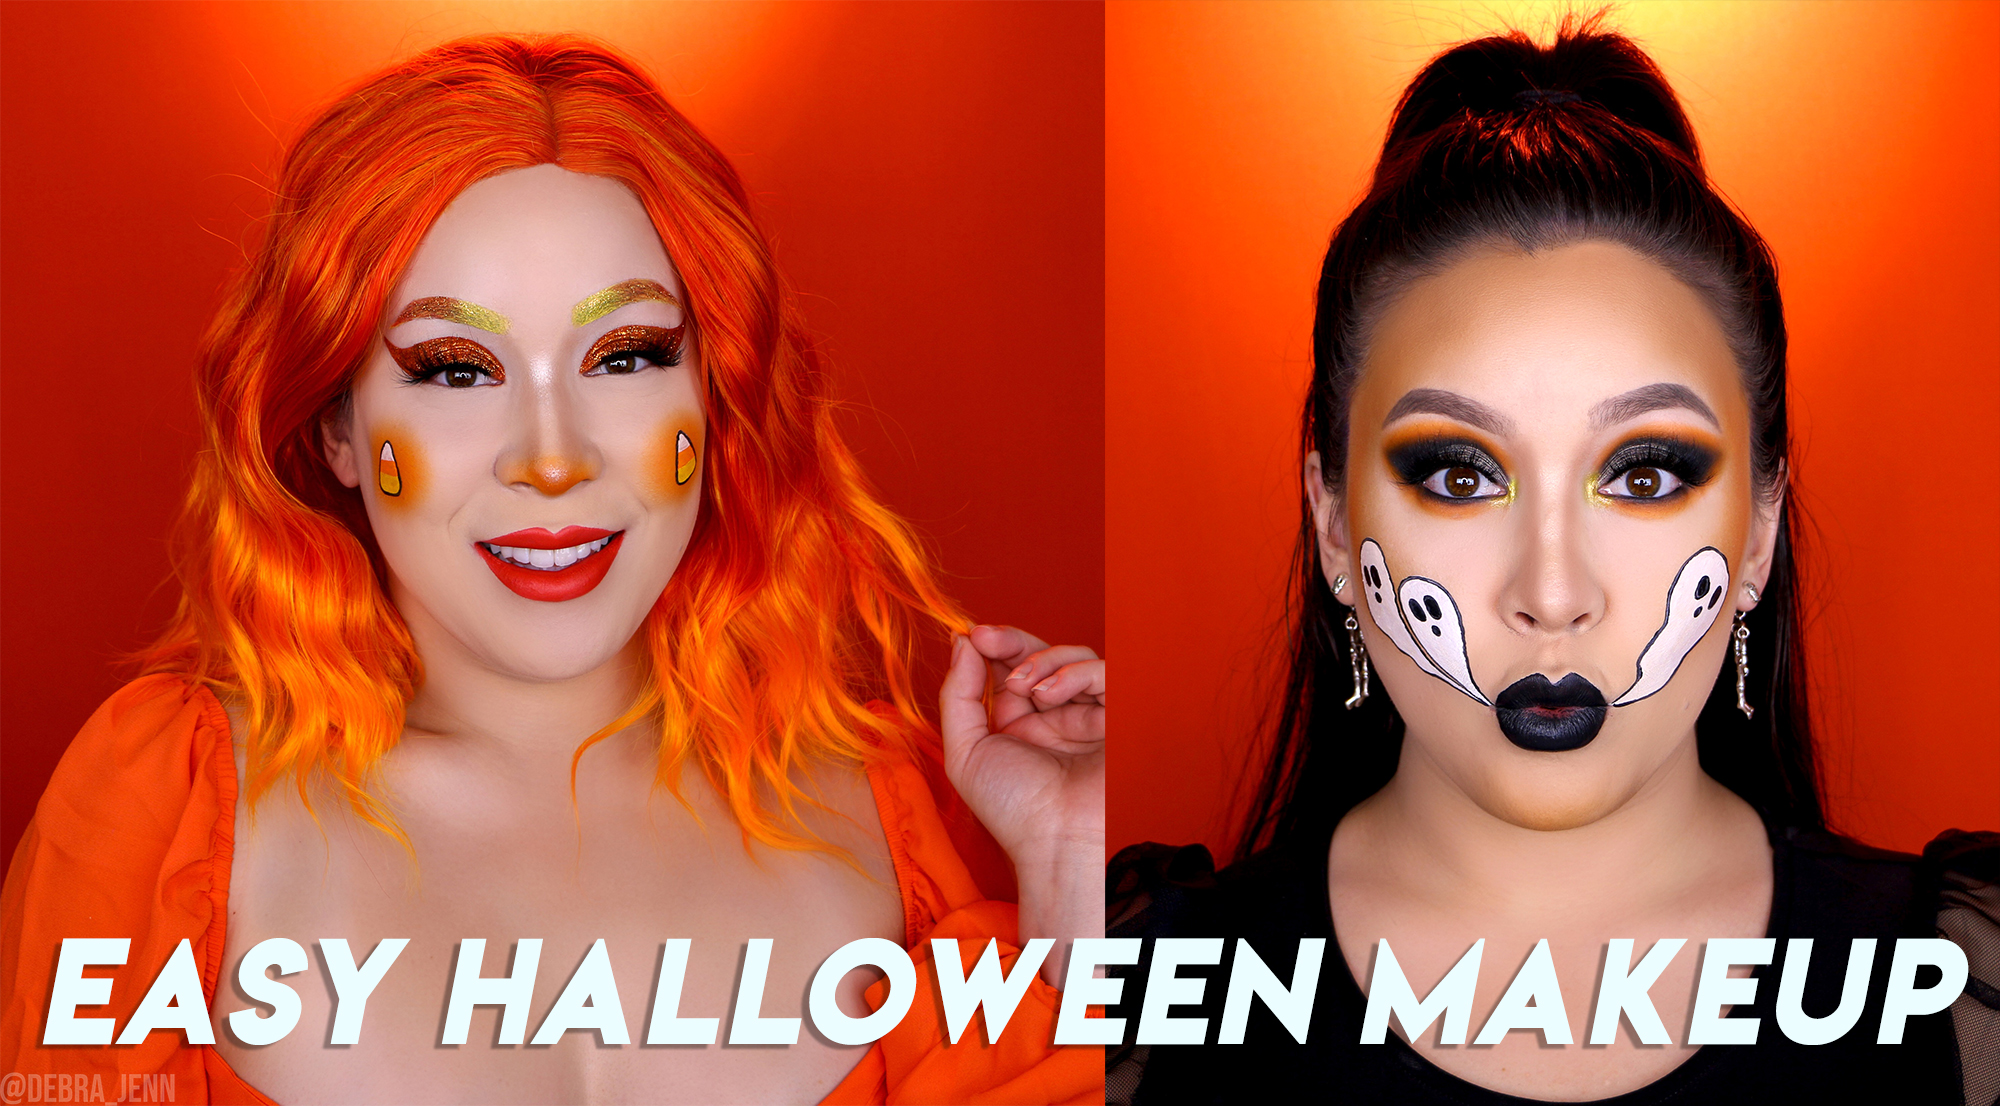 10 Easy Halloween Makeup Ideas for a Last-Minute DIY Costume